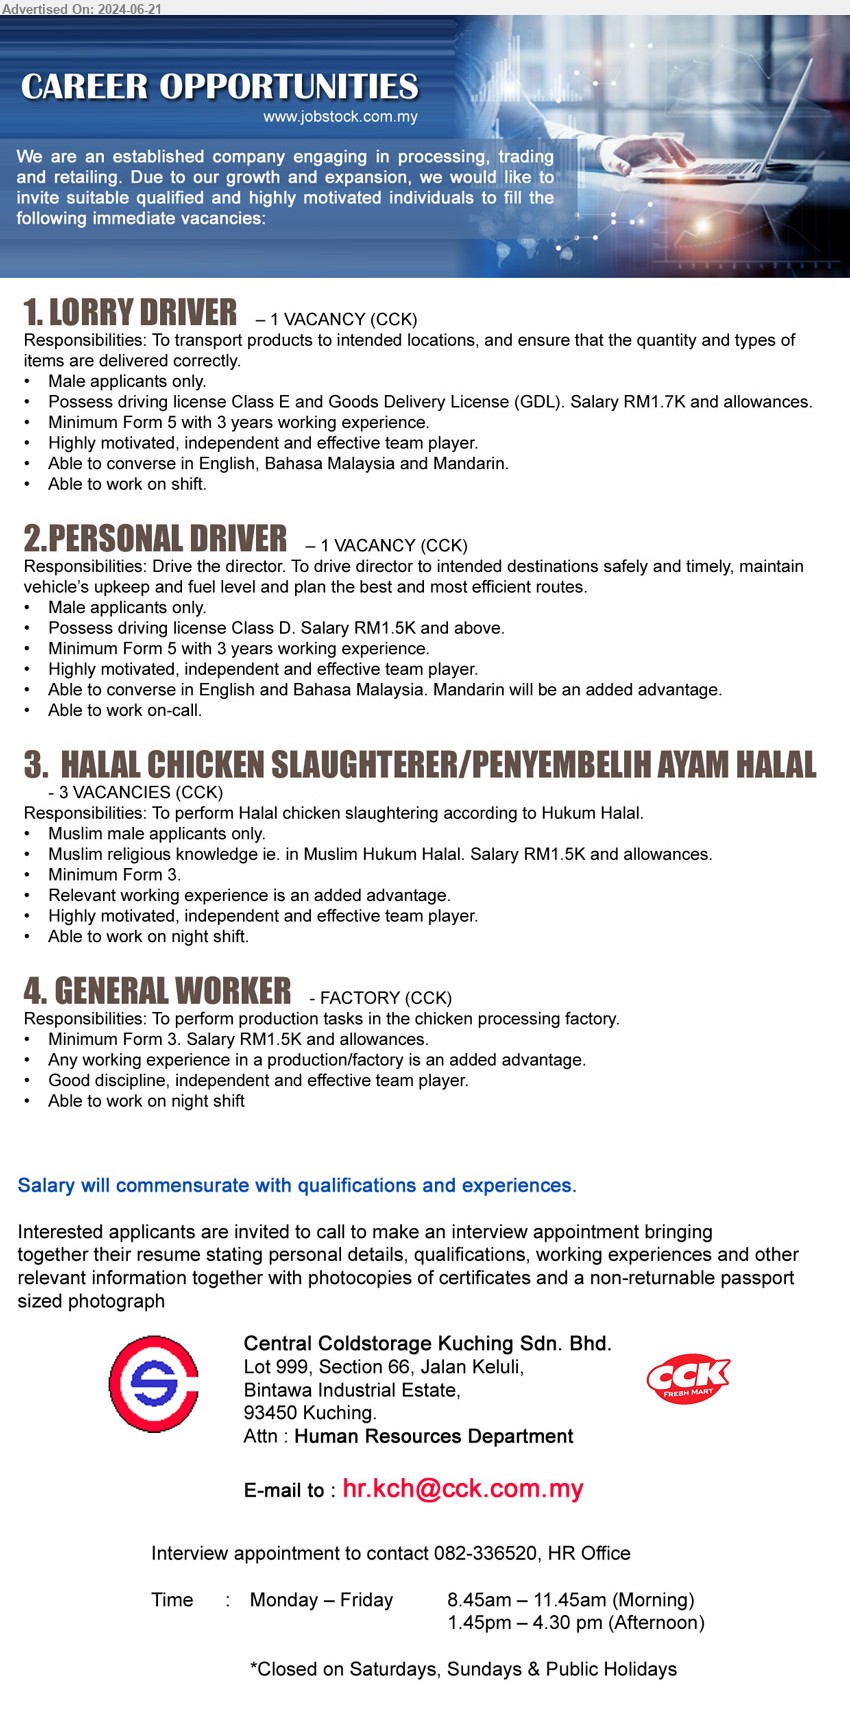 CENTRAL COLDSTORAGE KUCHING SDN BHD - 1. LORRY DRIVER (Kuching), male, Possess driving license Class E and Goods Delivery License (GDL). Salary RM1.7K and allowances,...
2. PERSONAL DRIVER (Kuching), male, Possess driving license Class D. Salary RM1.5K and above.,...
3. HALAL CHICKEN SLAUGHTERER/PENYEMBELIH AYAM HALAL (Kuching), 3 posts, Muslim religious knowledge ie. in Muslim Hukum Halal. Salary RM1.5K and allowances,...
4. GENERAL WORKER  (Kuching), Minimum Form 3. Salary RM1.5K and allowances,...
Interview appointment to contact 082-336520 /Email resume to ...